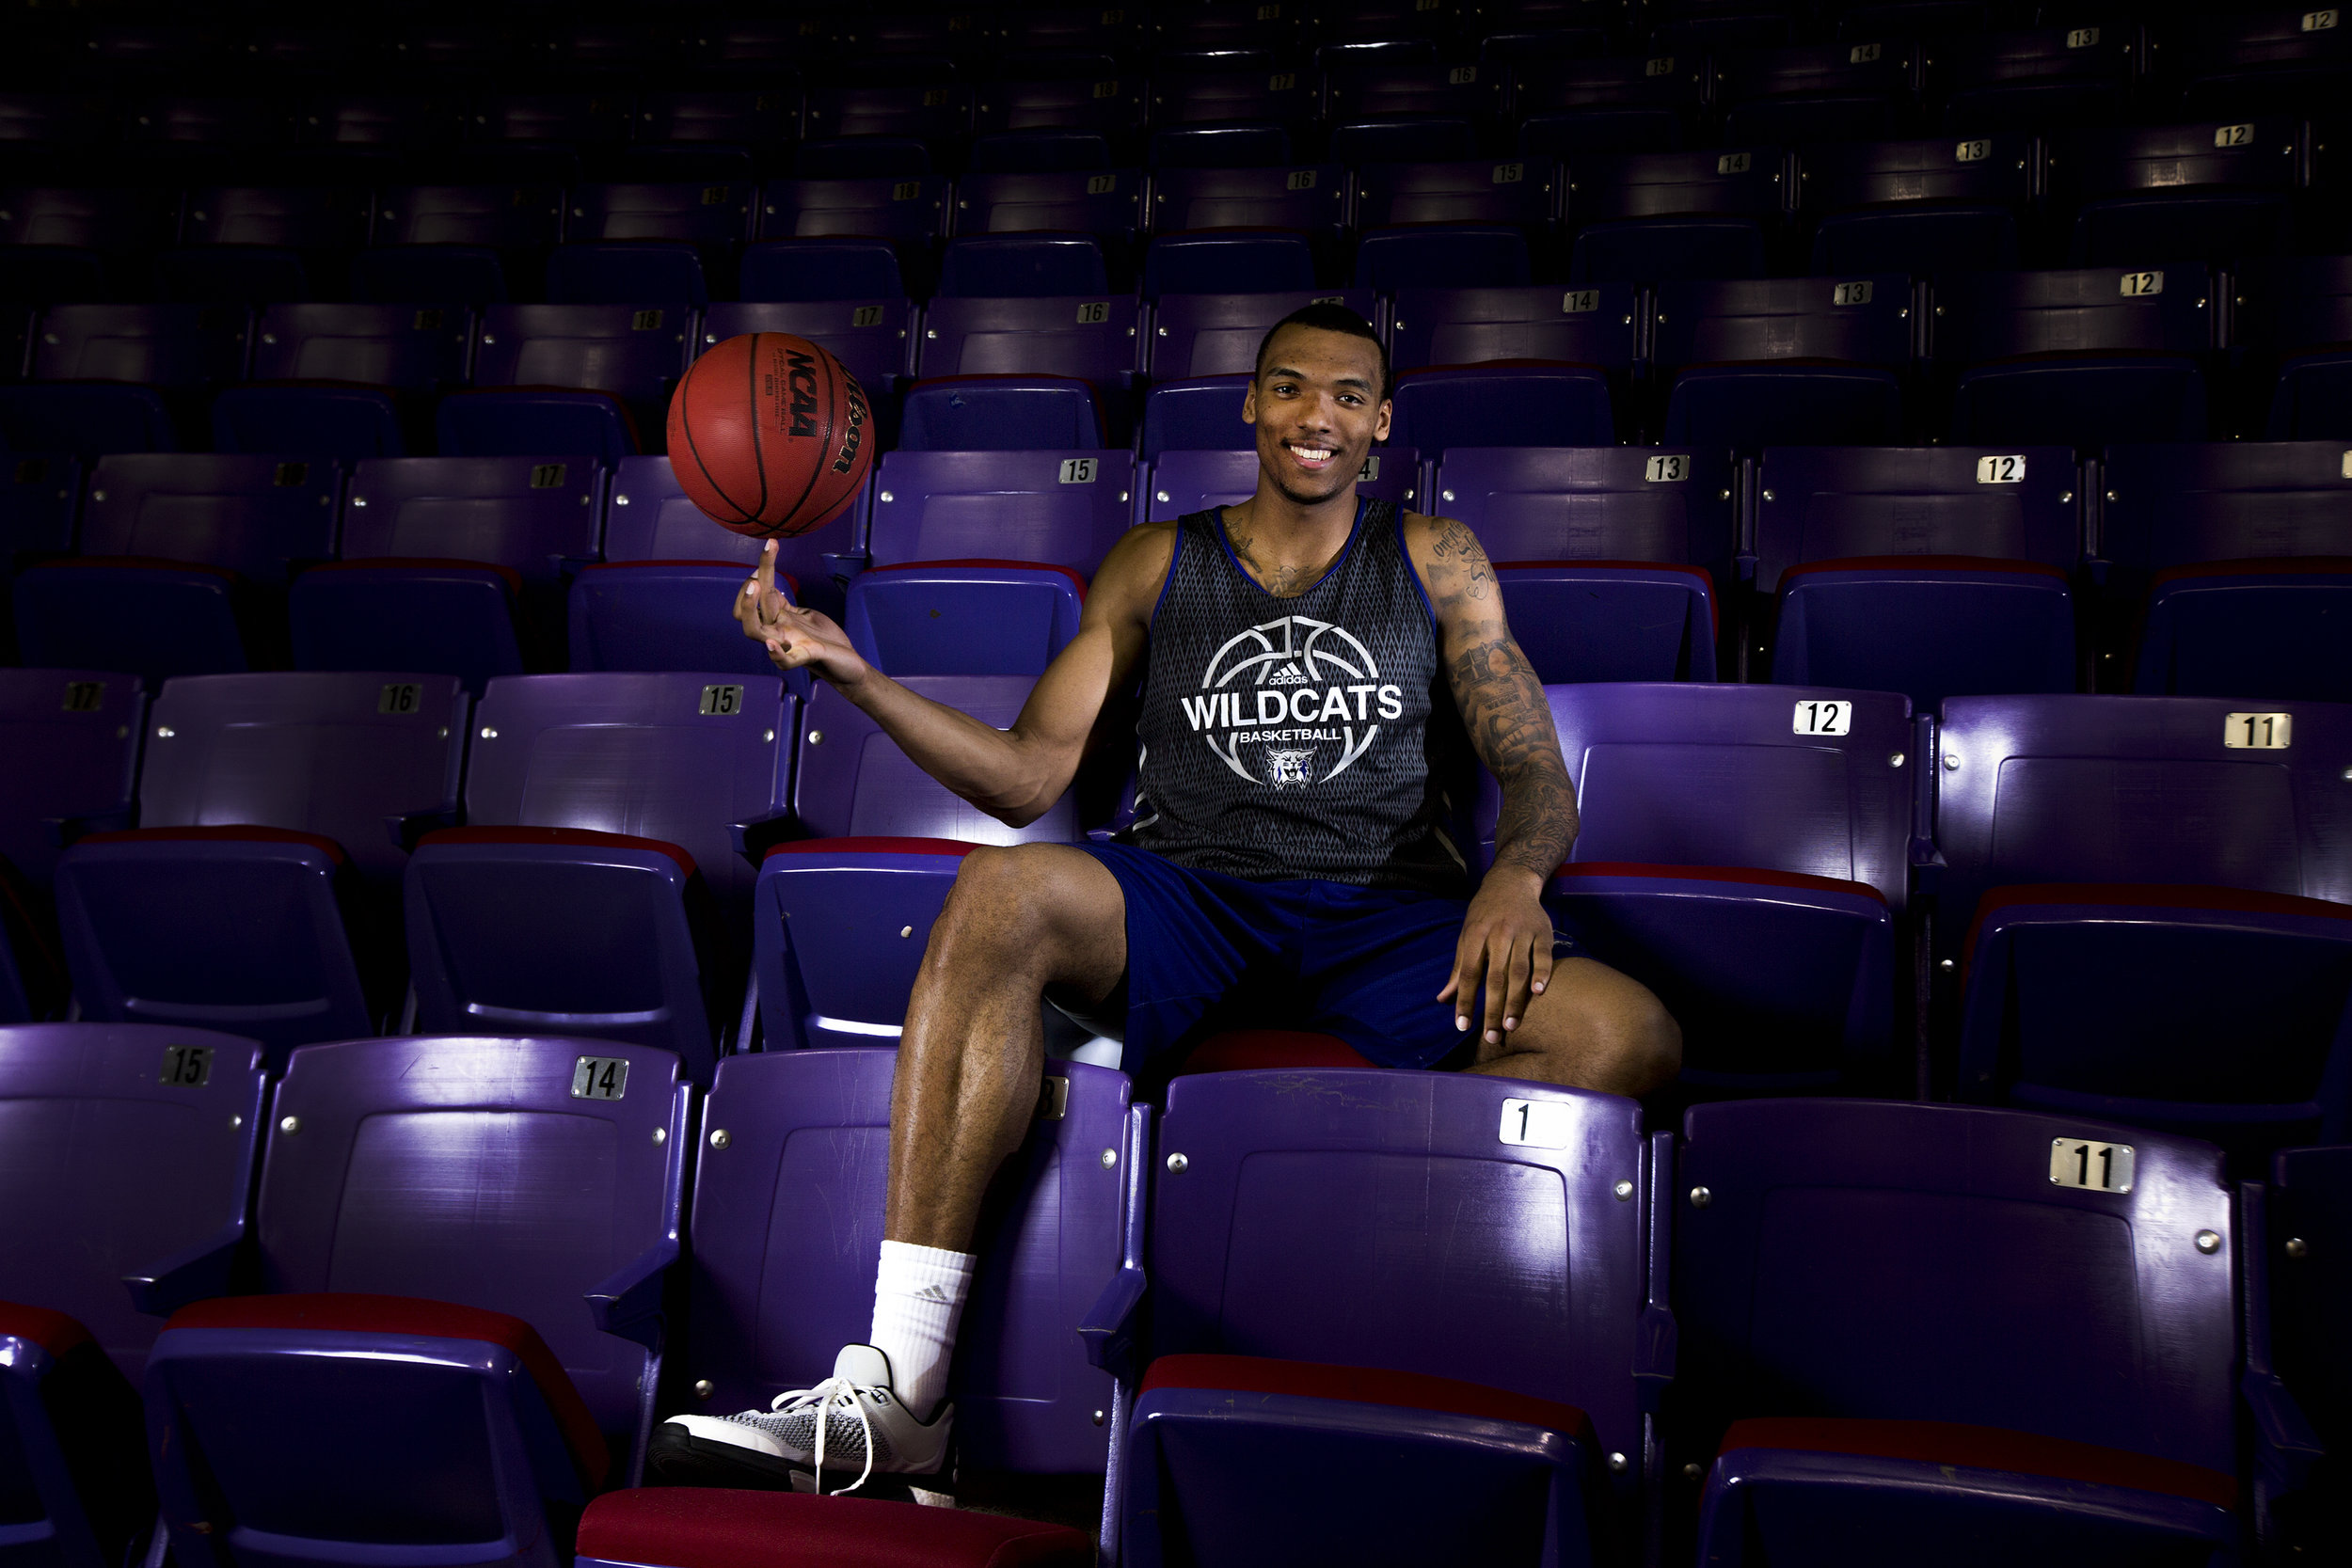  Halfway through the 2015-16 season Weber State's Joel Bolomboy is only one game away from breaking the Big Sky's all-time rebounding record, a record that has been held since the 1970's by Idaho State's Steve Hayes. NBA scouts have taken notice of t